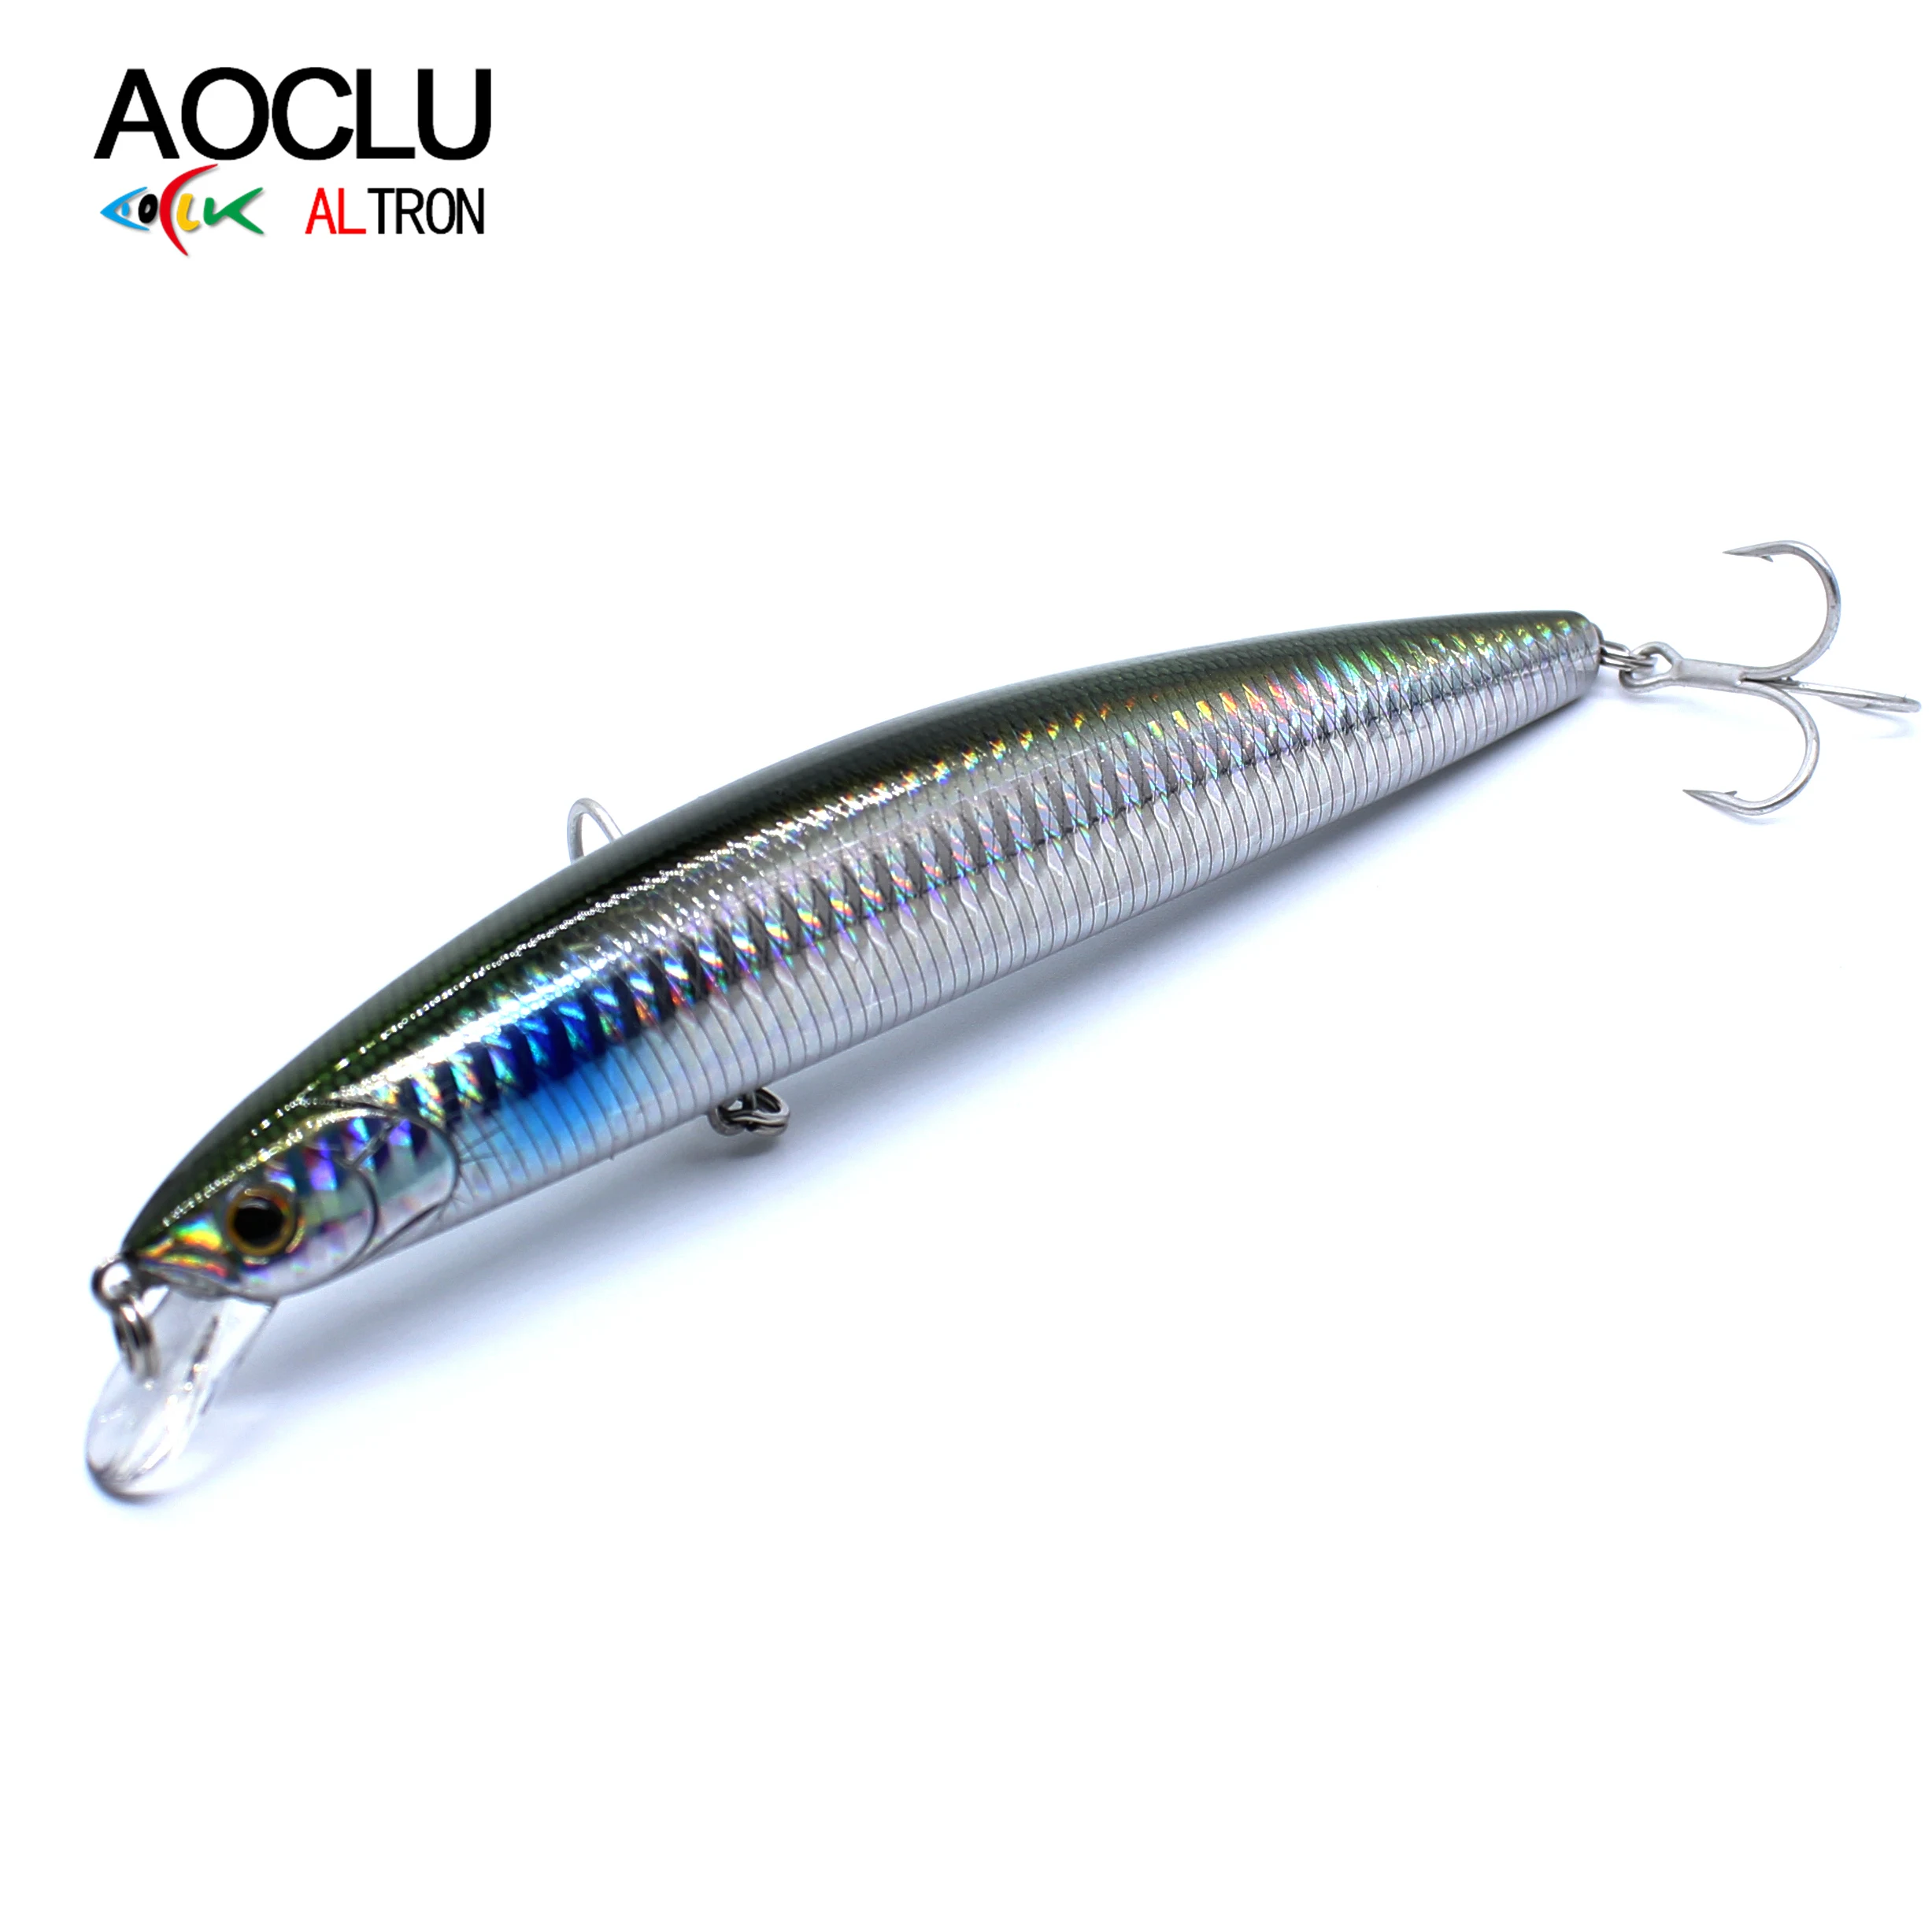 AOCLU Jerkbait wobblers 16cm 30g Depth 0.5-1.5m Floating Hard Bait Minnow Fishing lures weight transfer for long casting enlarge